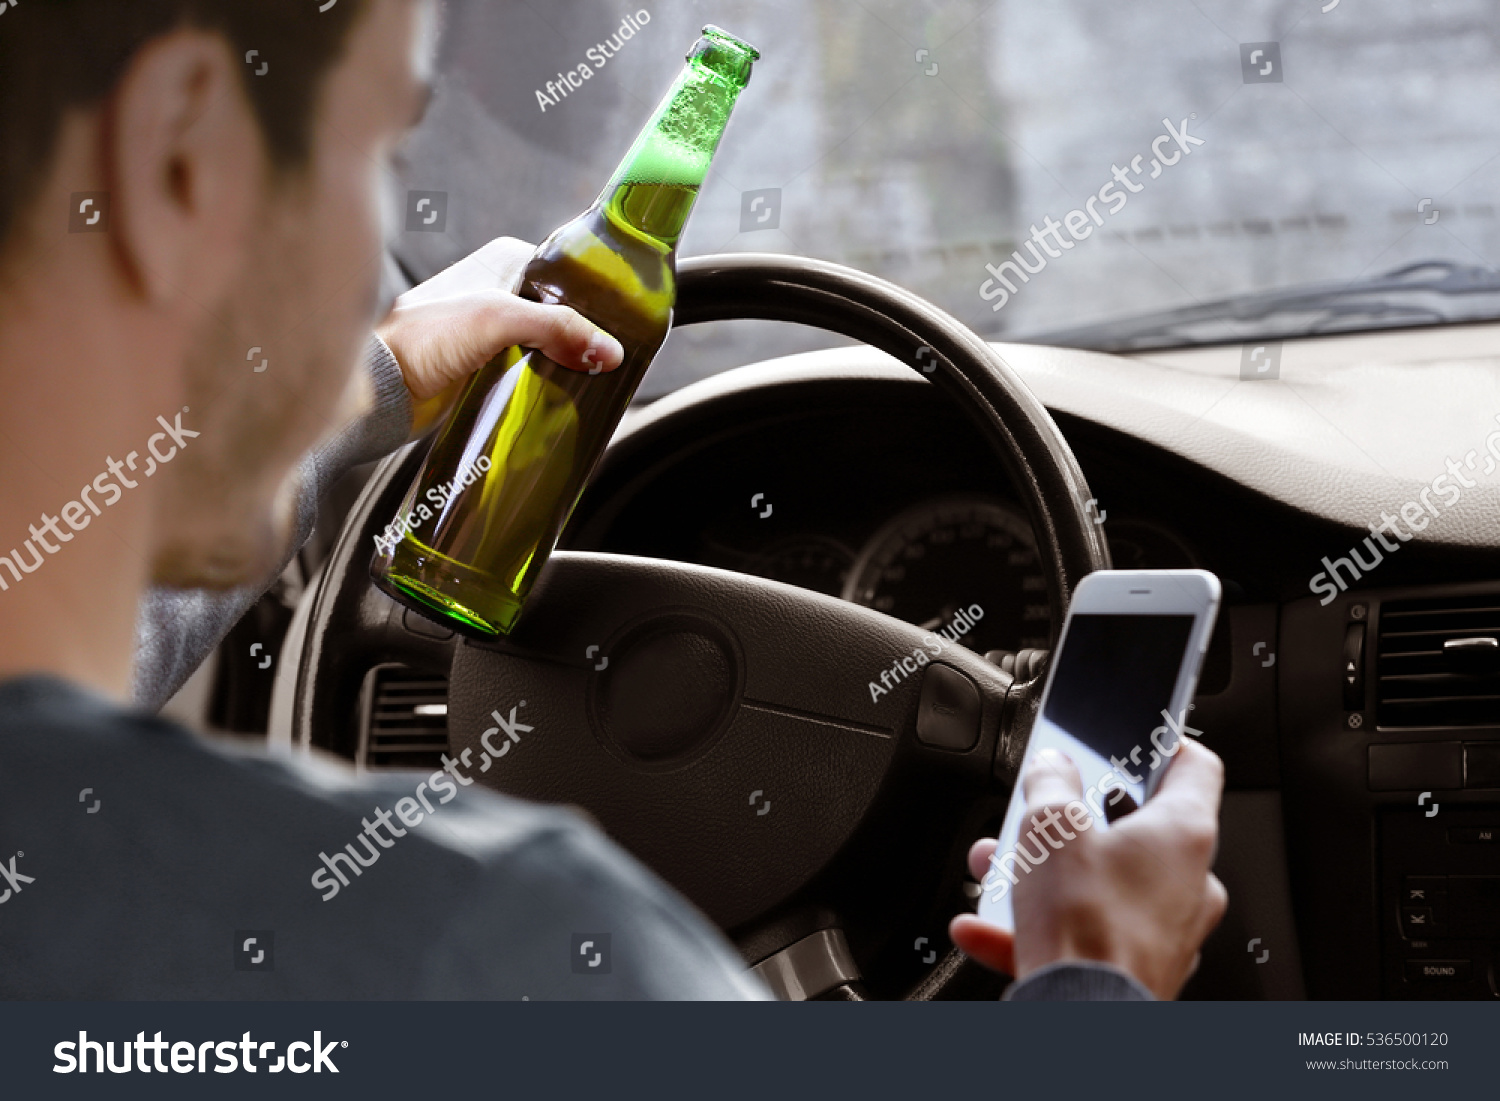 Man holding mobile phone and bottle of beer while driving car, closeup. Don't drink and drive concept #536500120